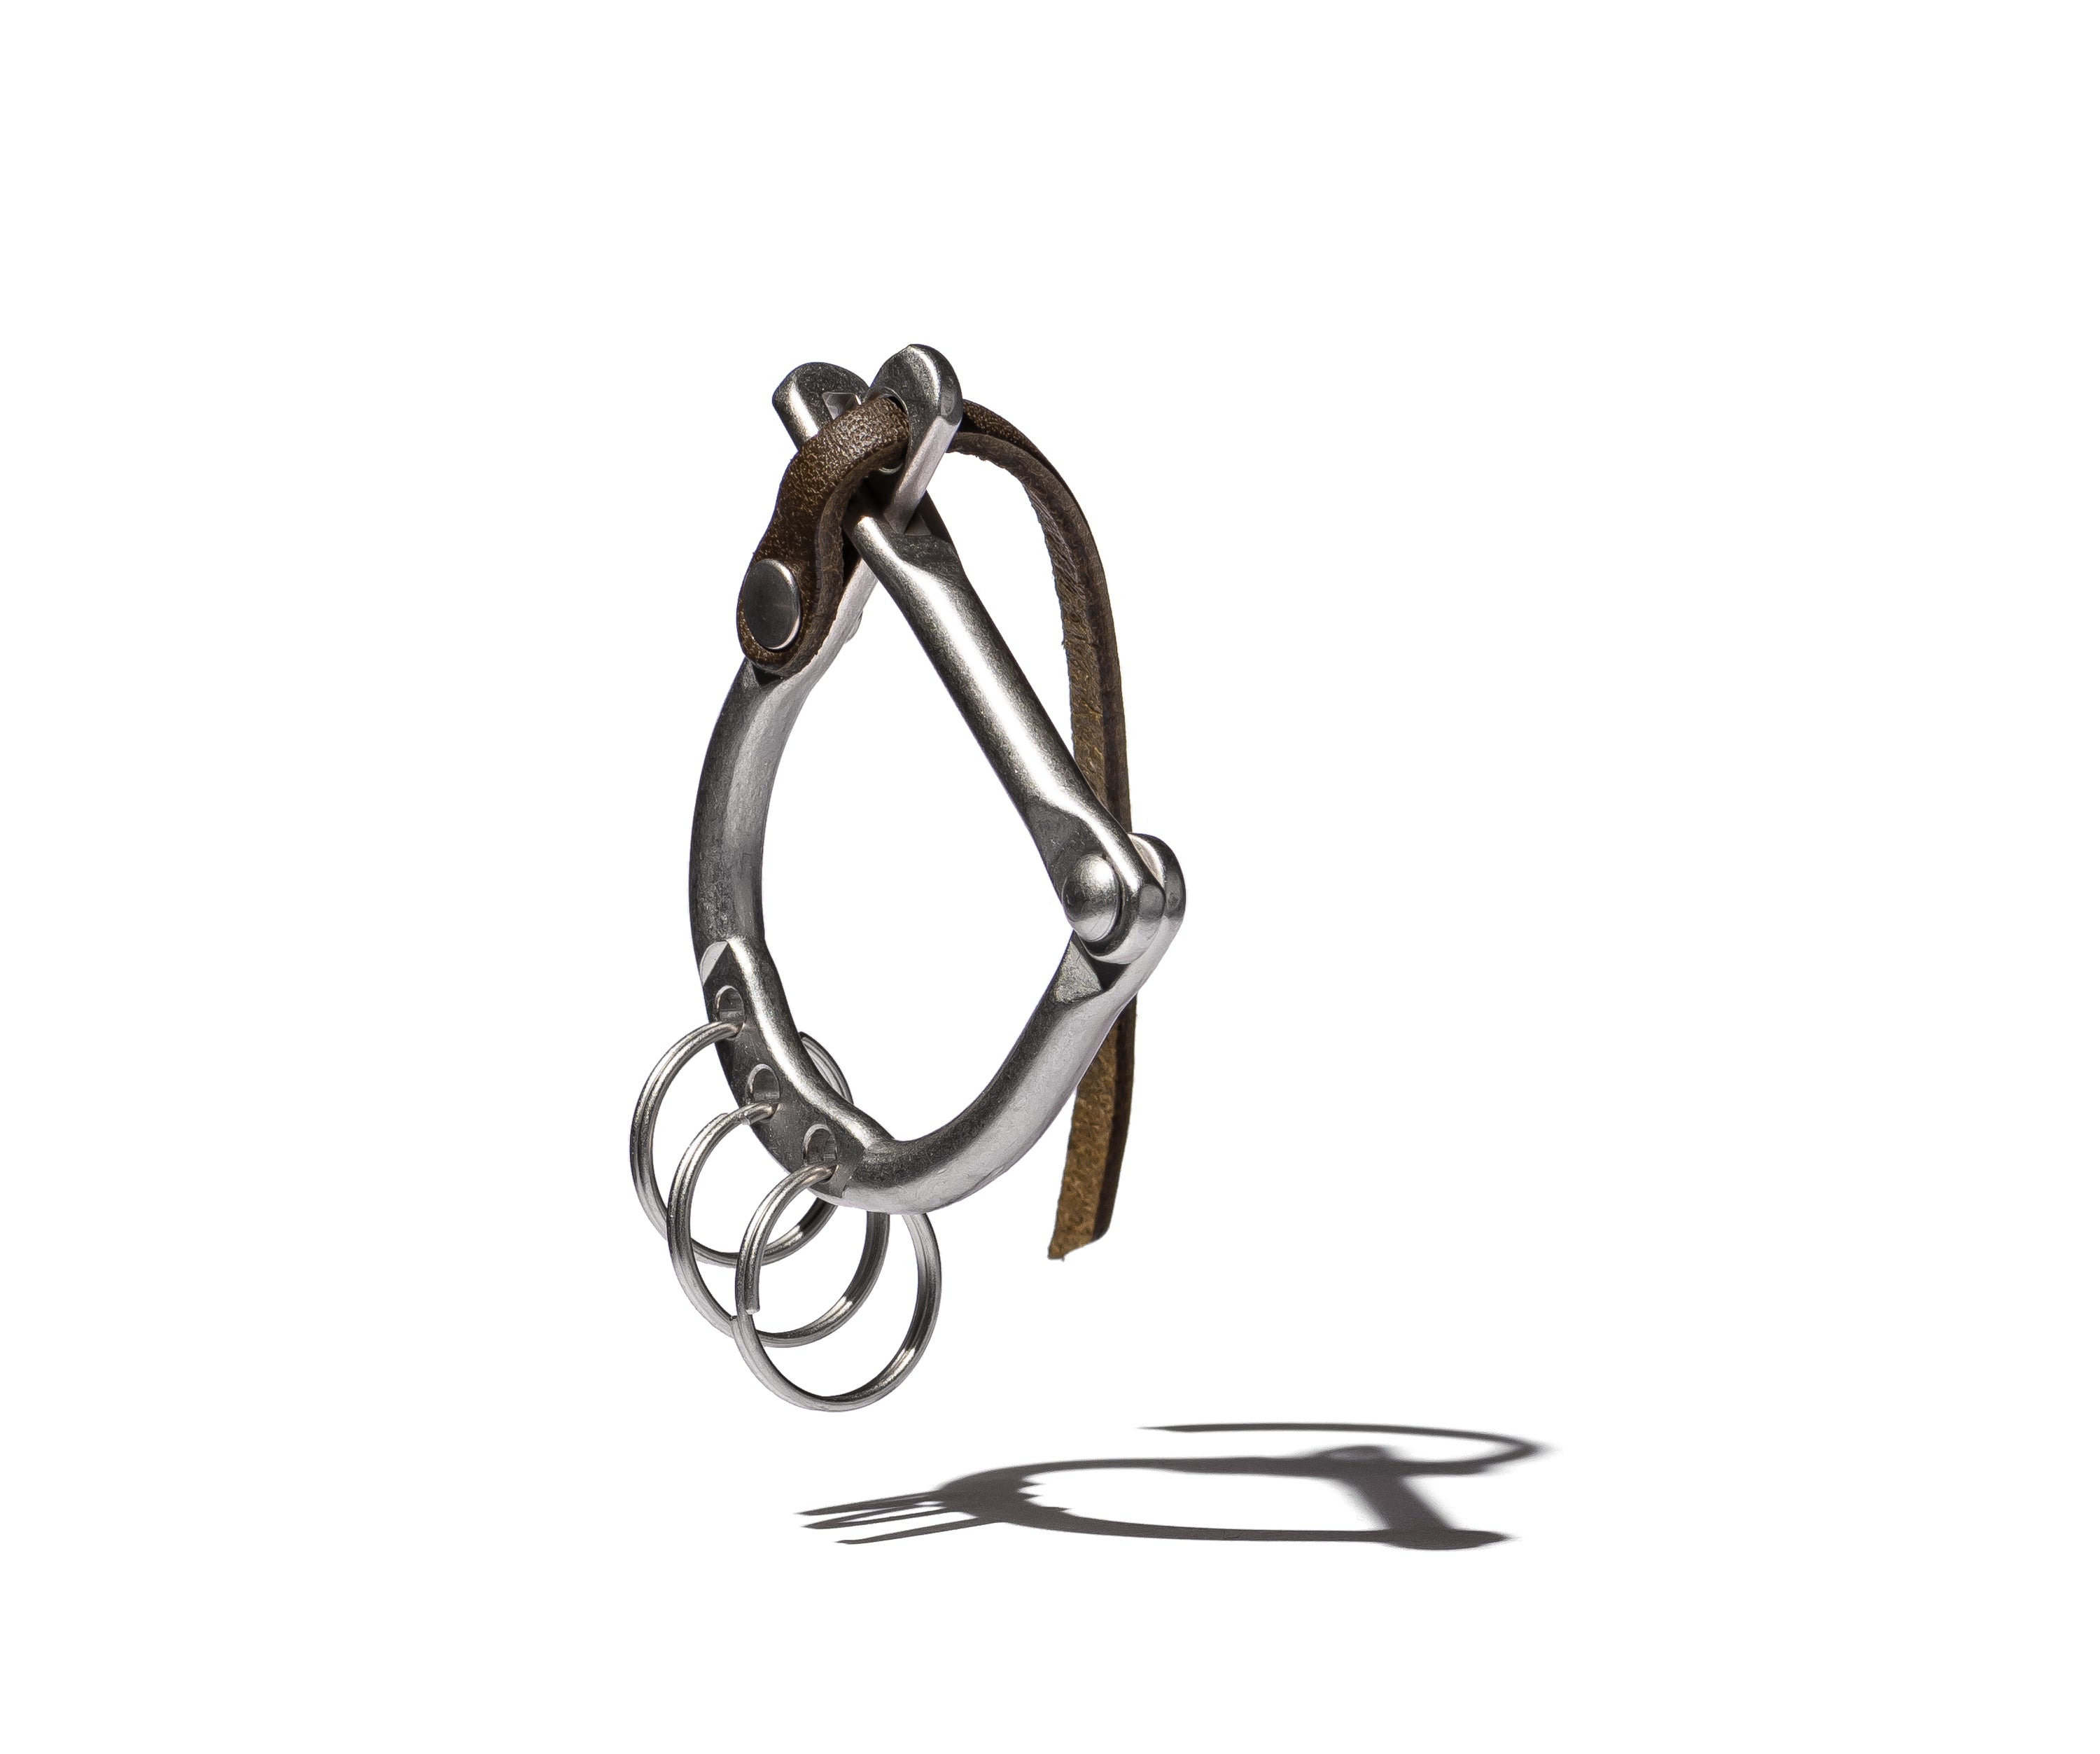 D LOCK CARABINER KEY RING with COW LEATHER